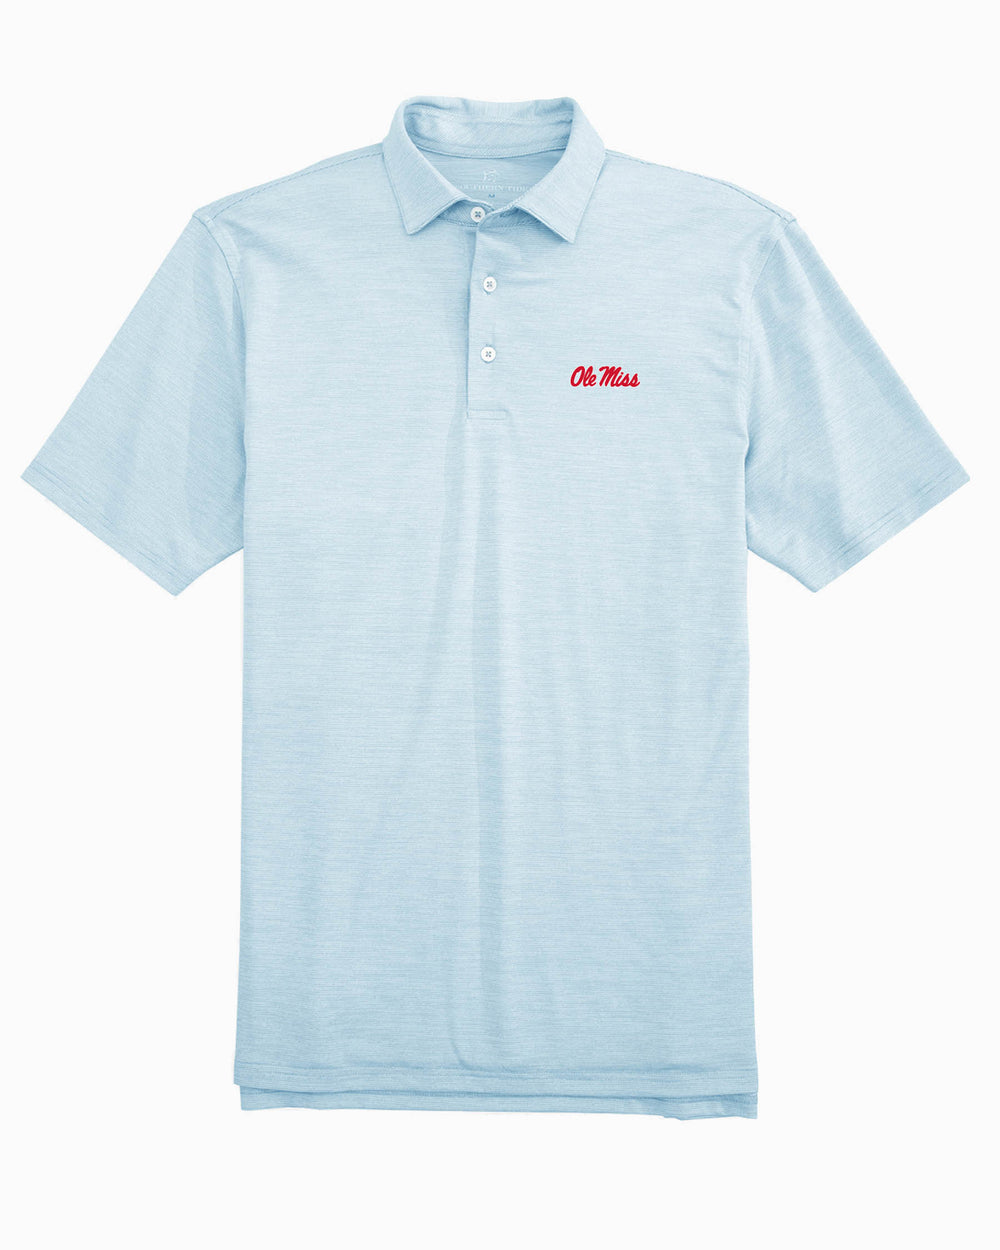 The front of the Ole Miss Driver Spacedye Polo Shirt by Southern Tide - Rush Blue